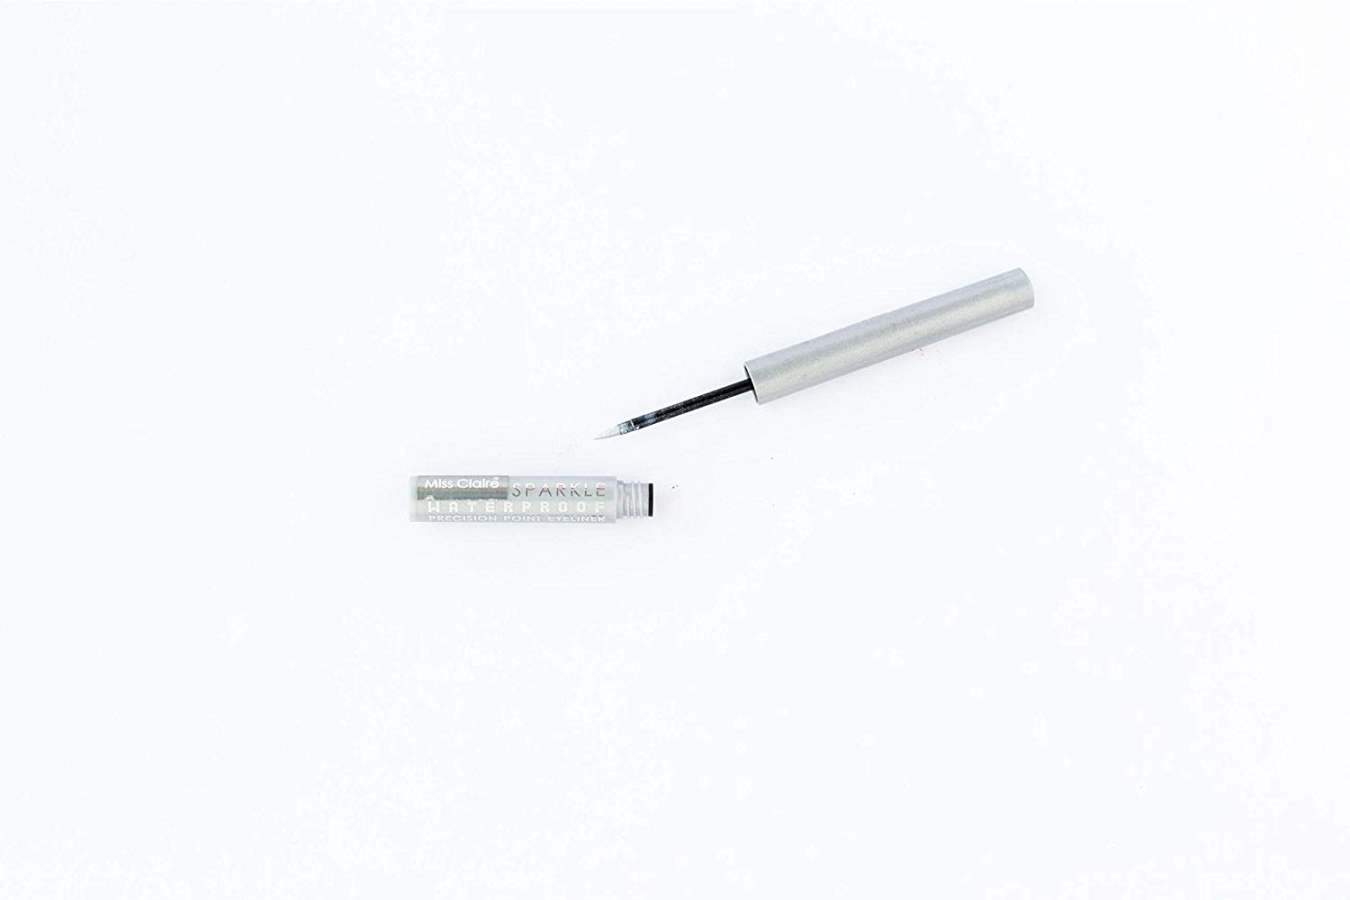 Miss Claire Parkle Waterproof Precision Point Eyeliner, Silver